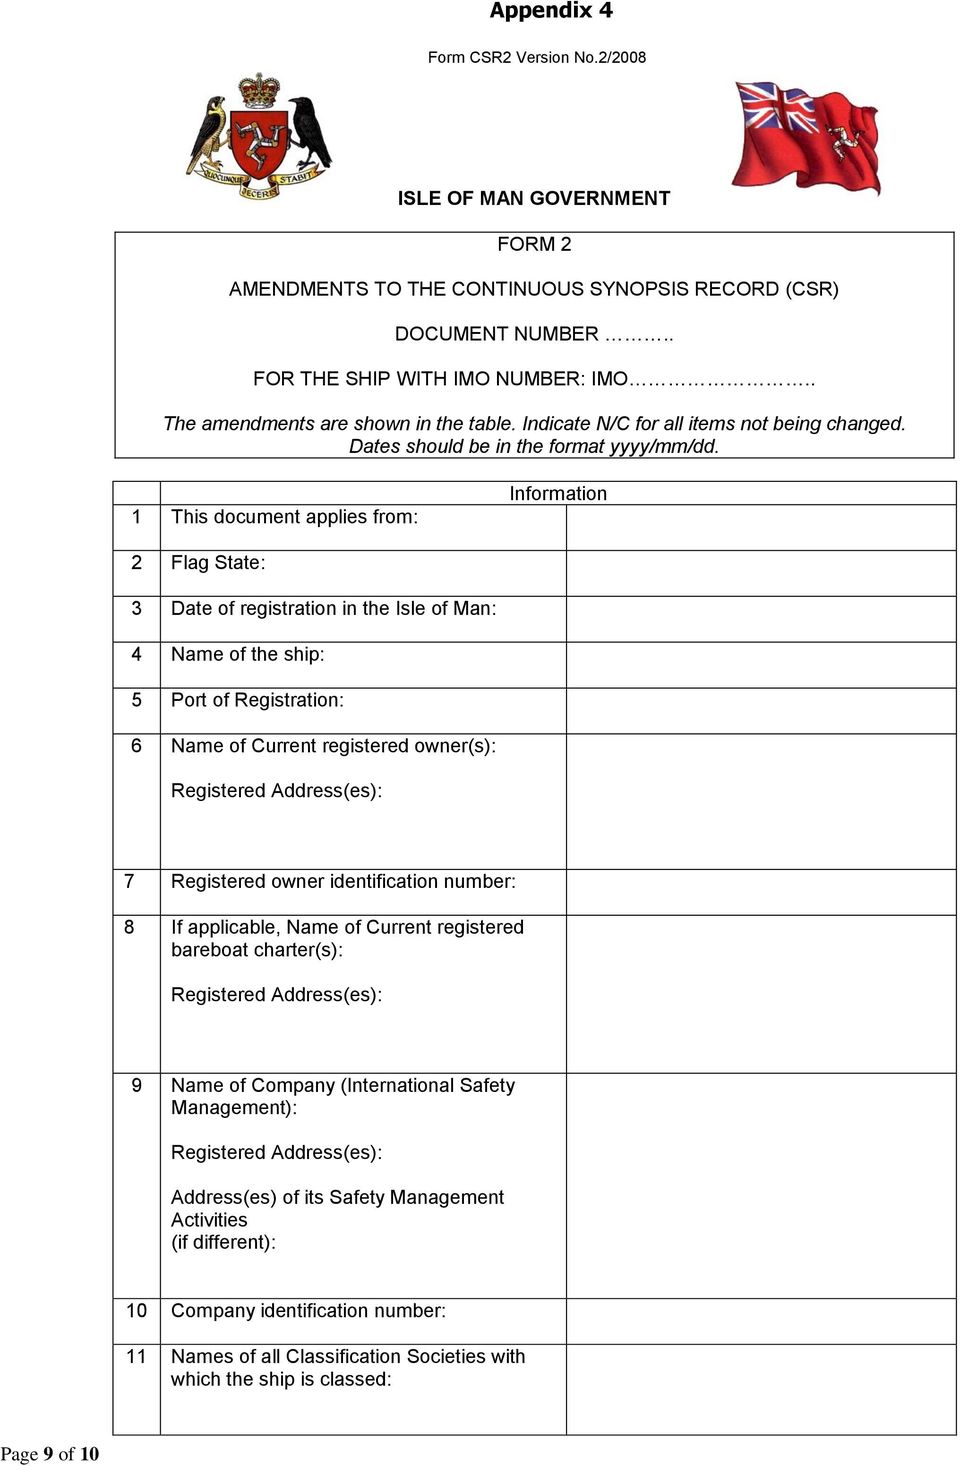 1 This document applies from: Information 2 Flag State: 3 Date of registration in the Isle of Man: 4 Name of the ship: 5 Port of Registration: 6 Name of Current registered owner(s): Registered